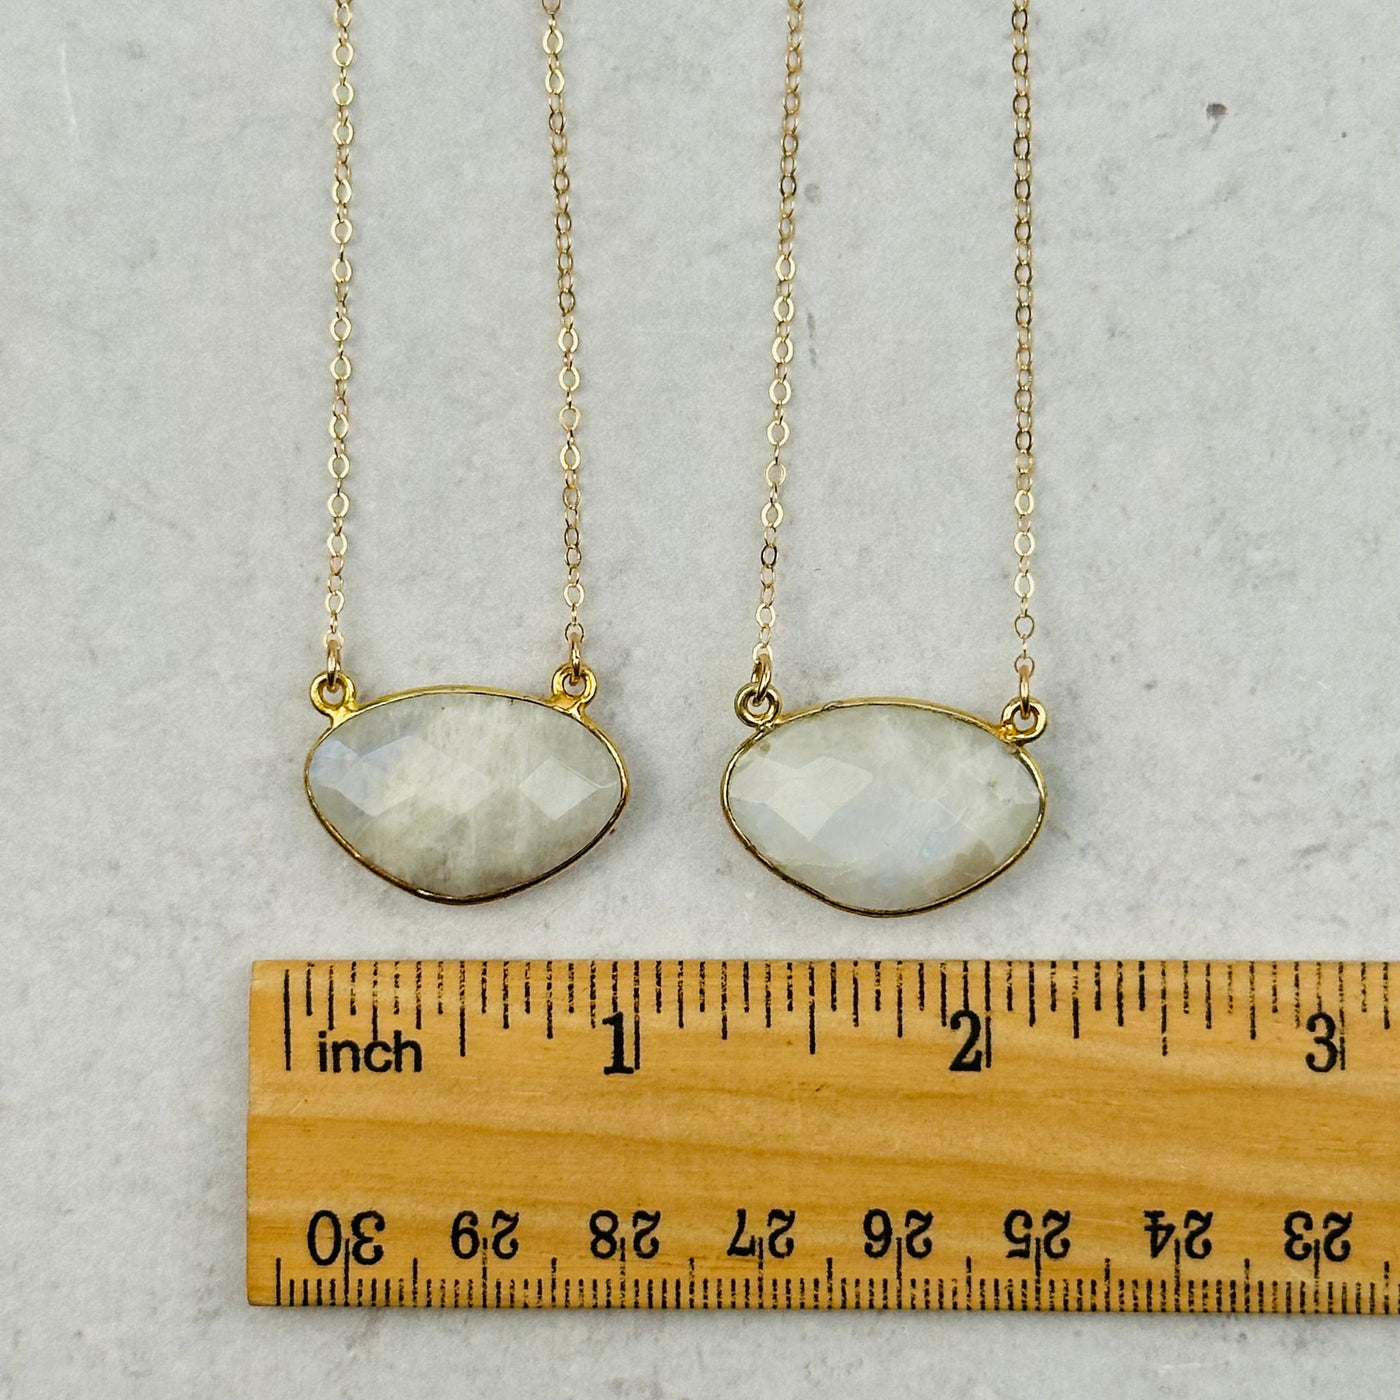 pendants next to a ruler for size referenece 